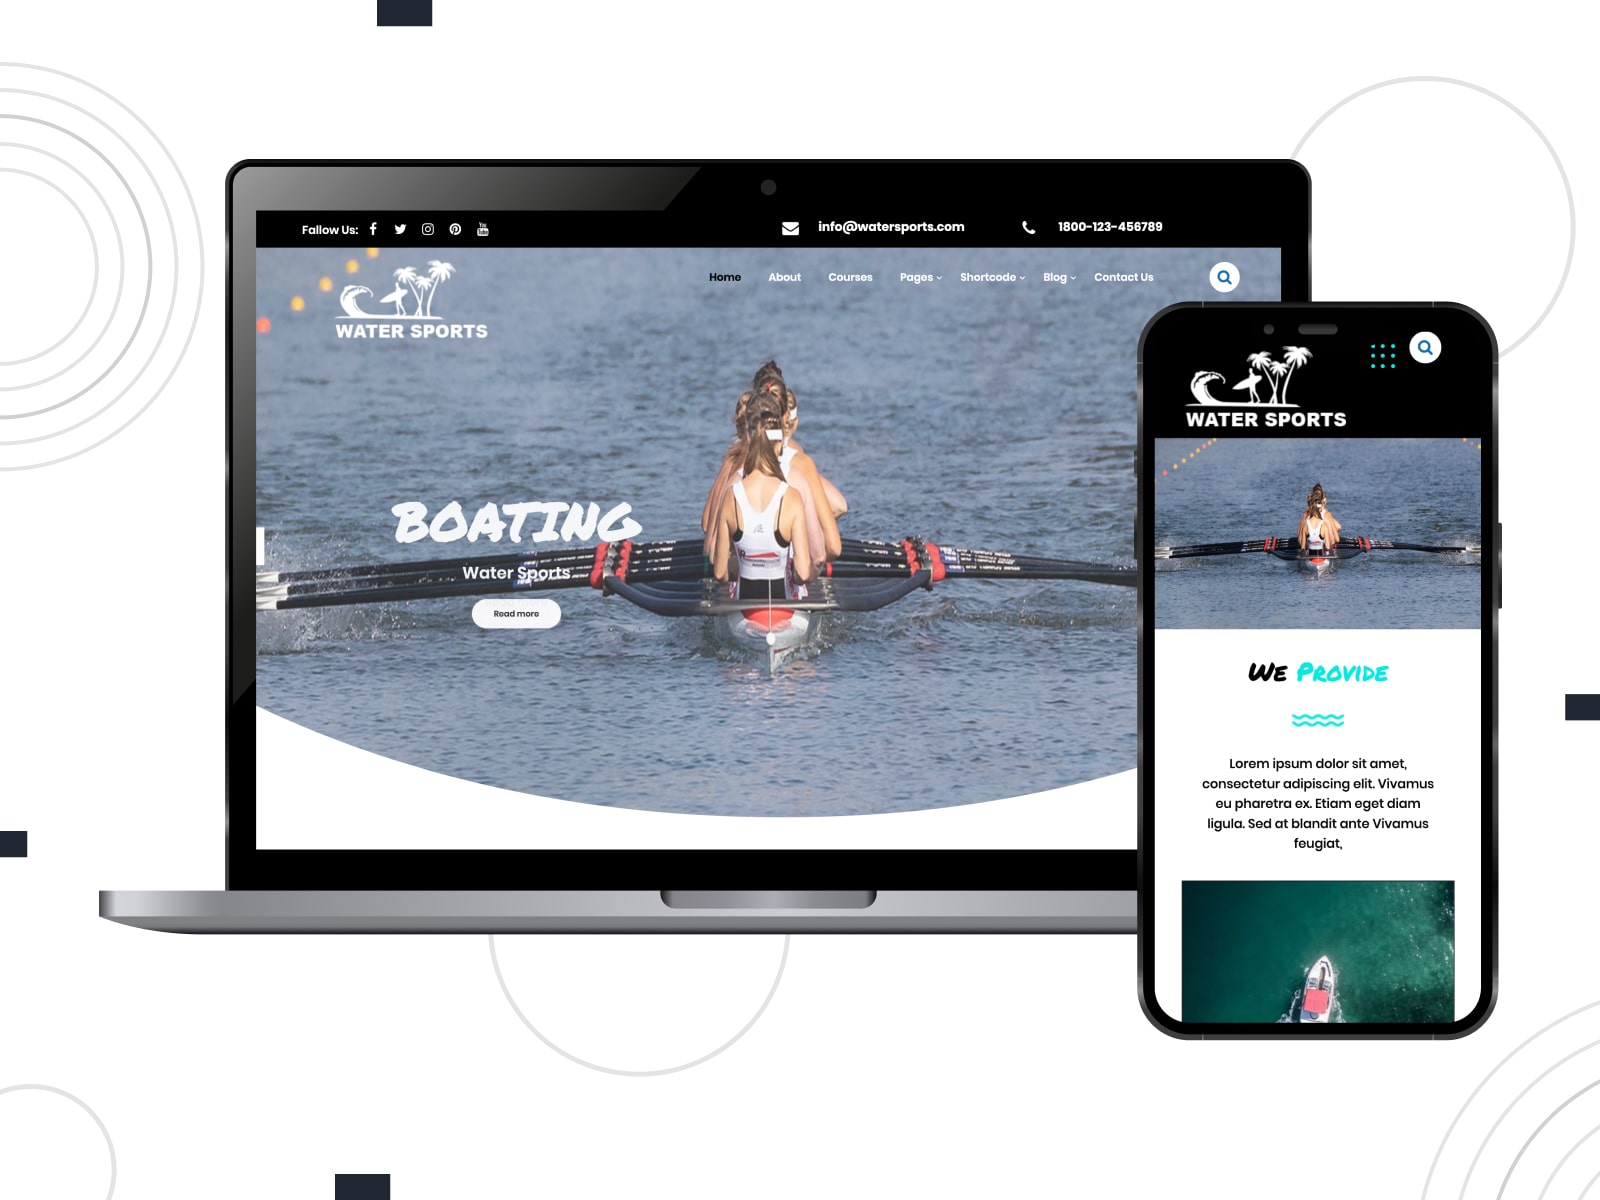 Collage of the free Water Sports Club WordPress rental theme for boat websites in blue and white colors on mobile and desktop screens.